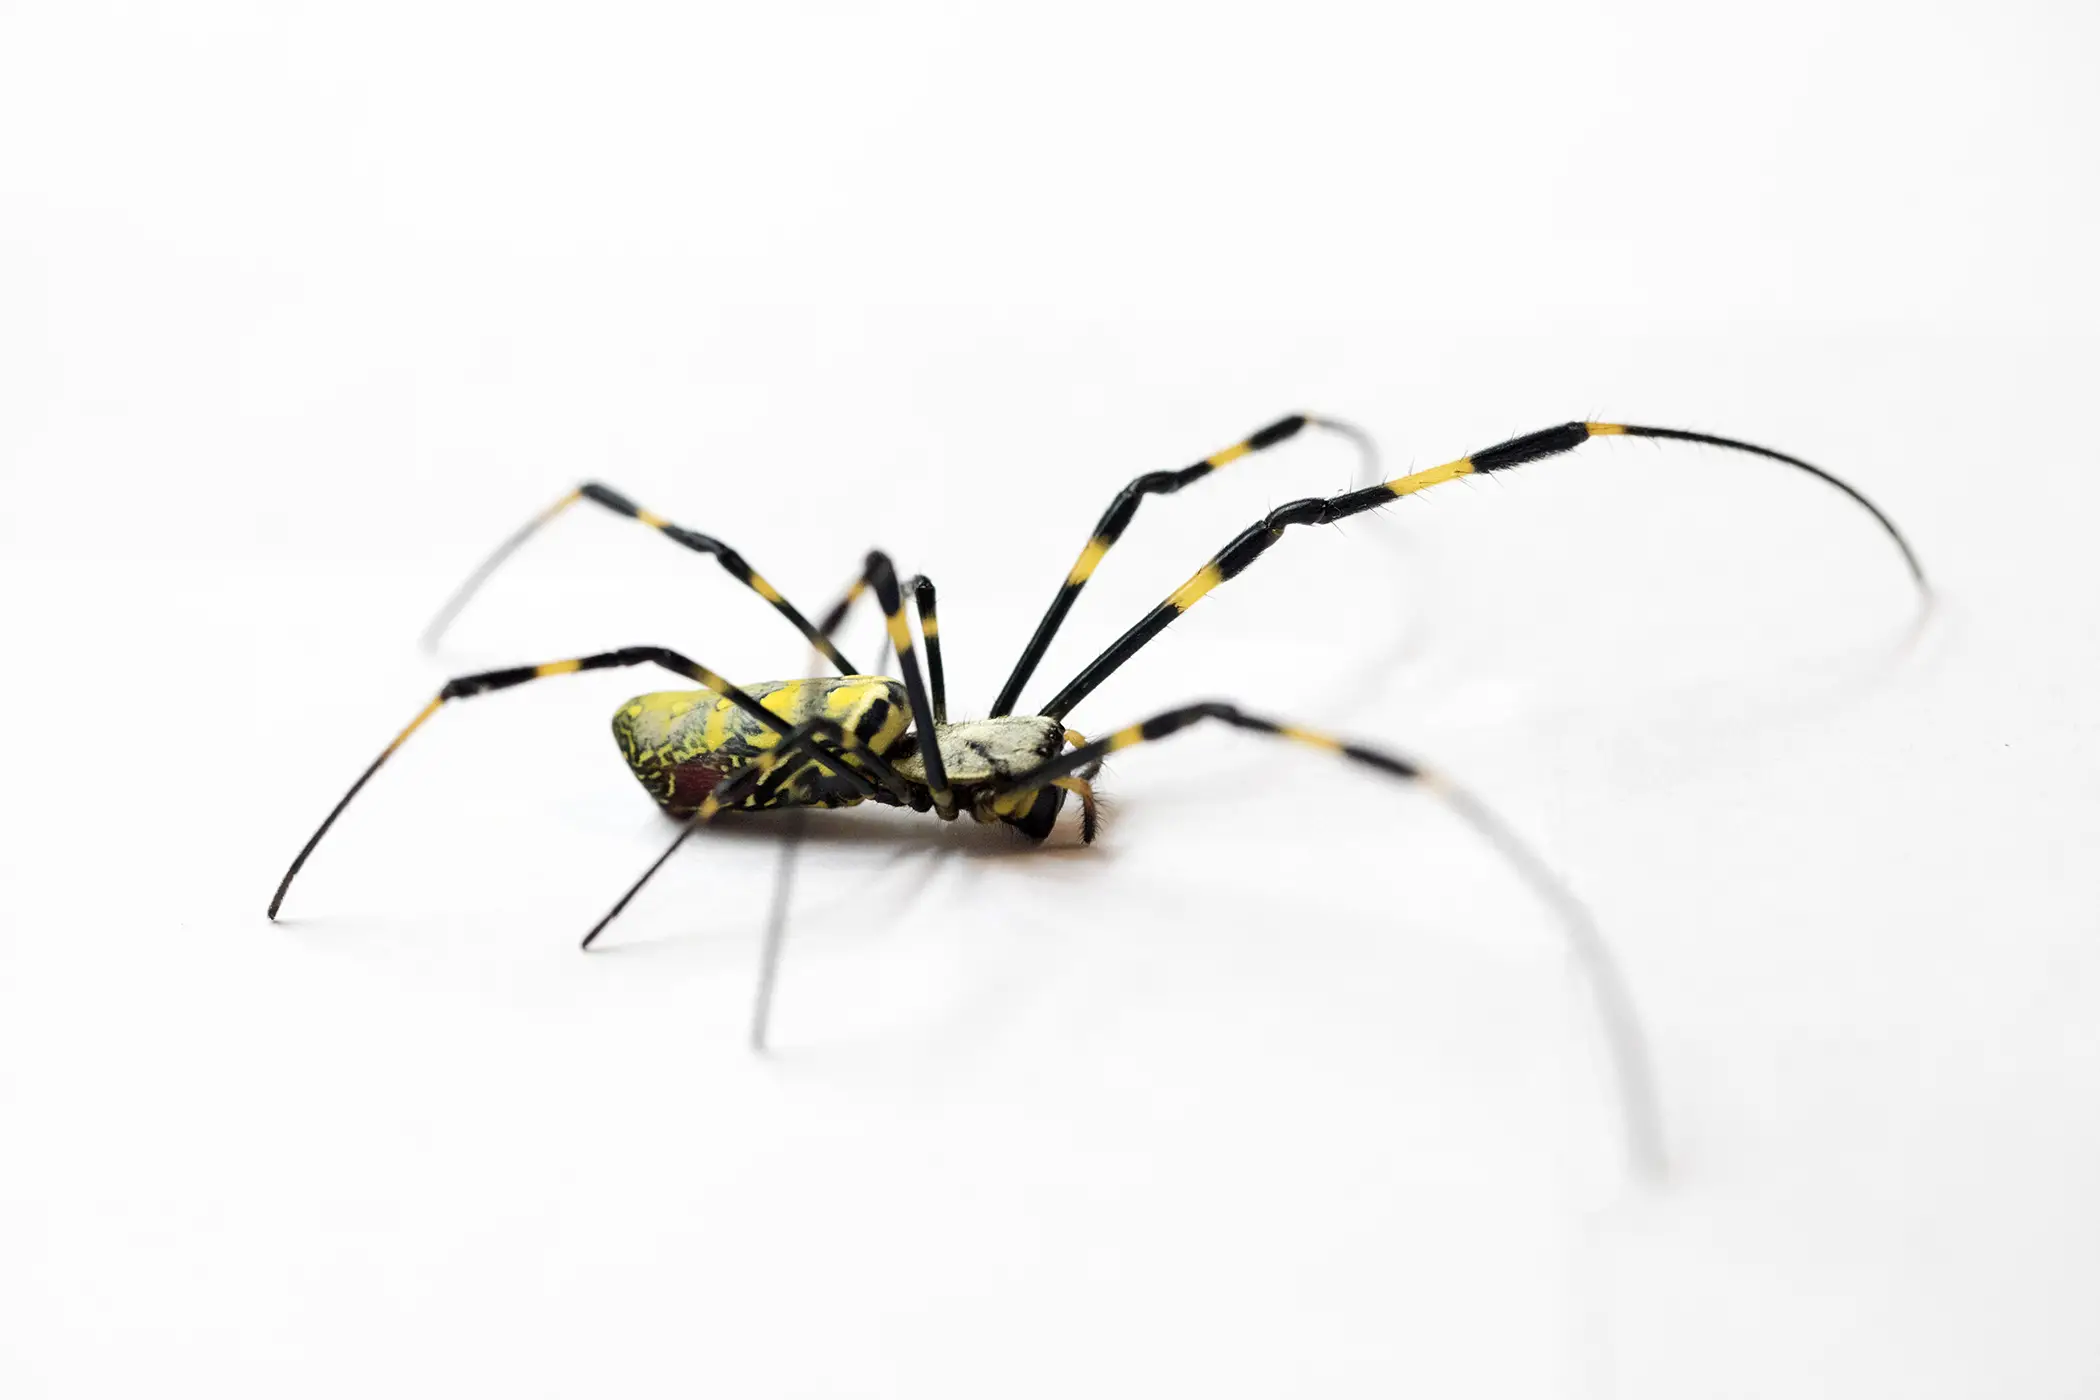 Reproduction Of Black Spiders With White Spots